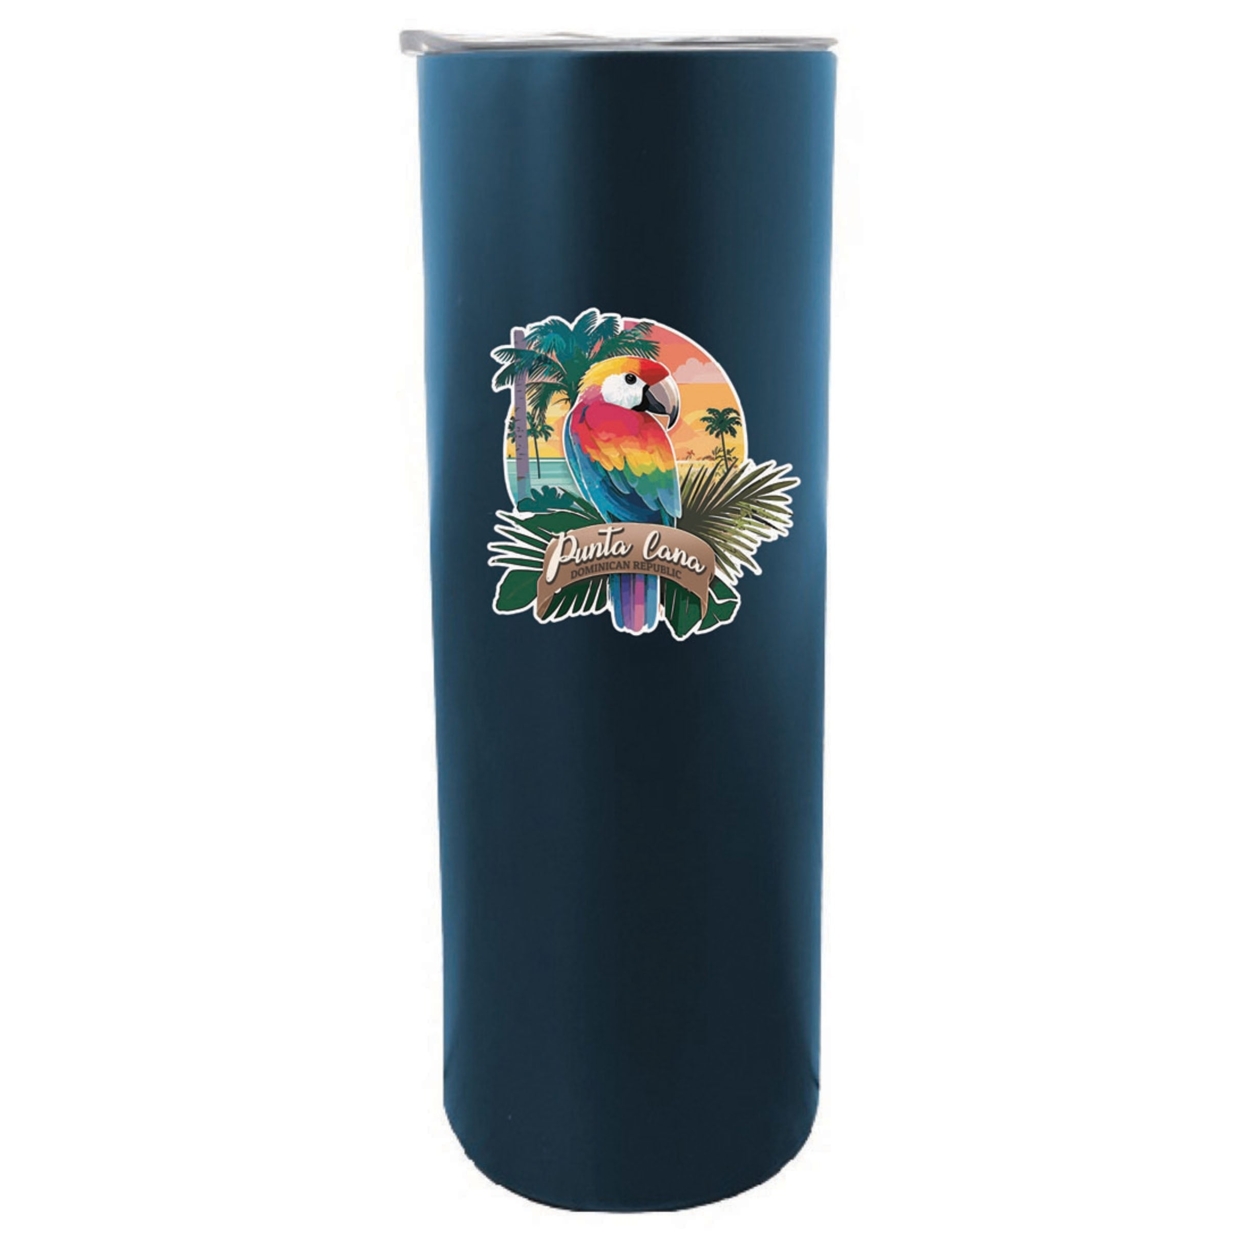 Punta Cana Dominican Republic Souvenir 20 Oz Insulated Stainless Steel Skinny Tumbler - Navy, PARROT